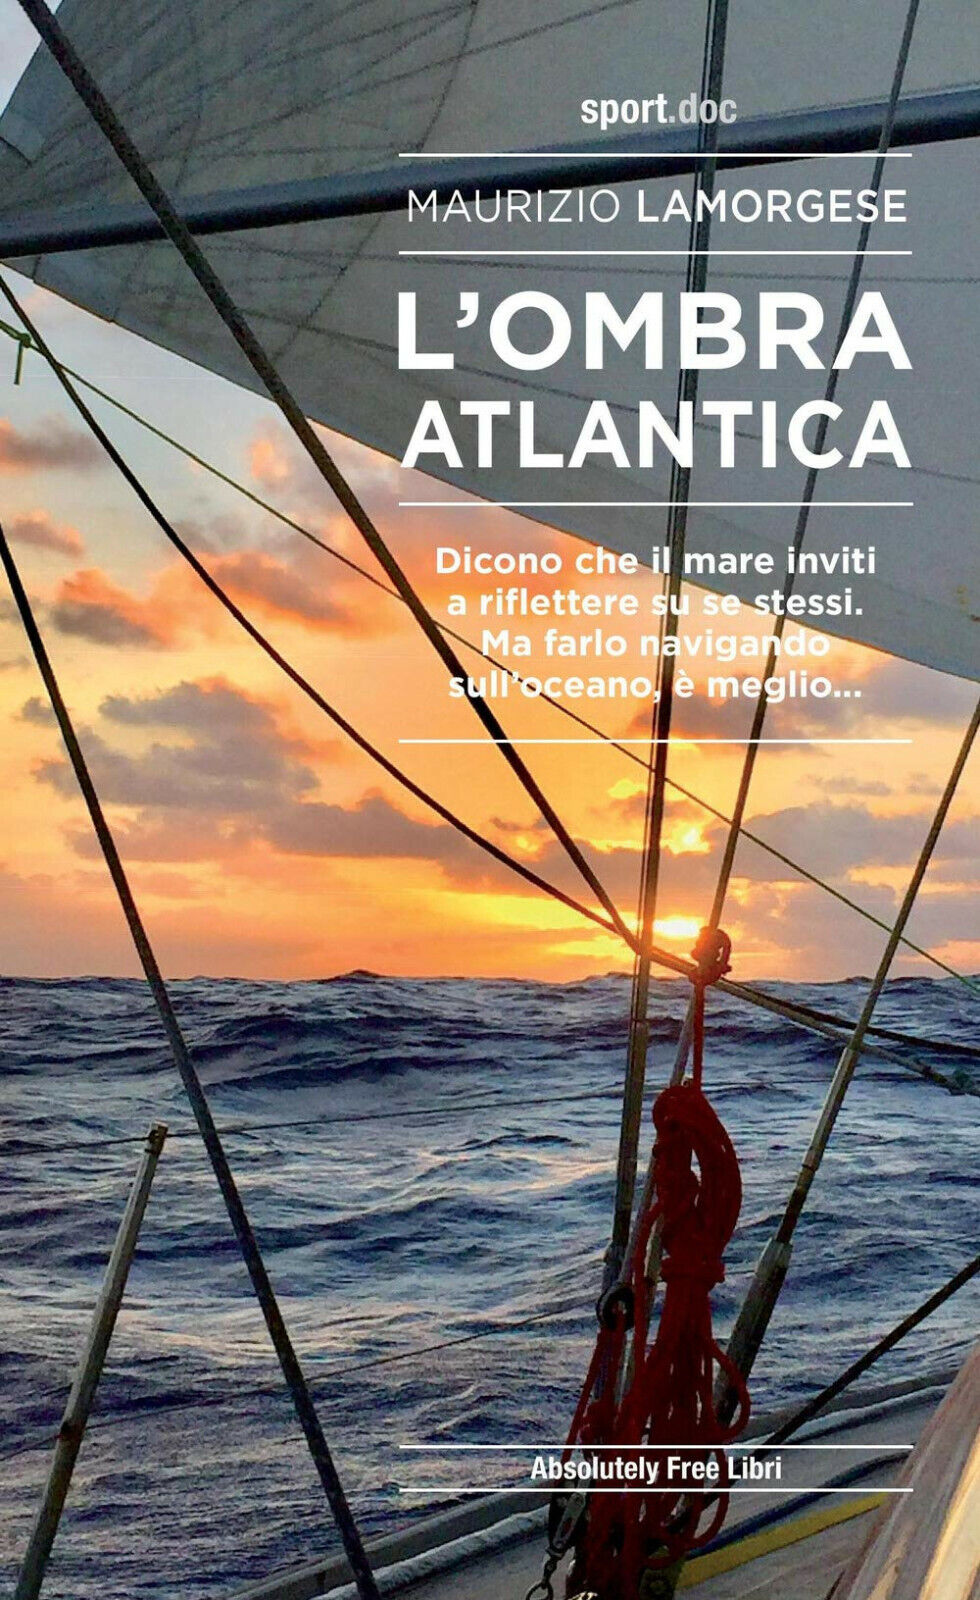 L'ombra atlantica - Maurizio Lamorgese - Absolutely Free, 2020